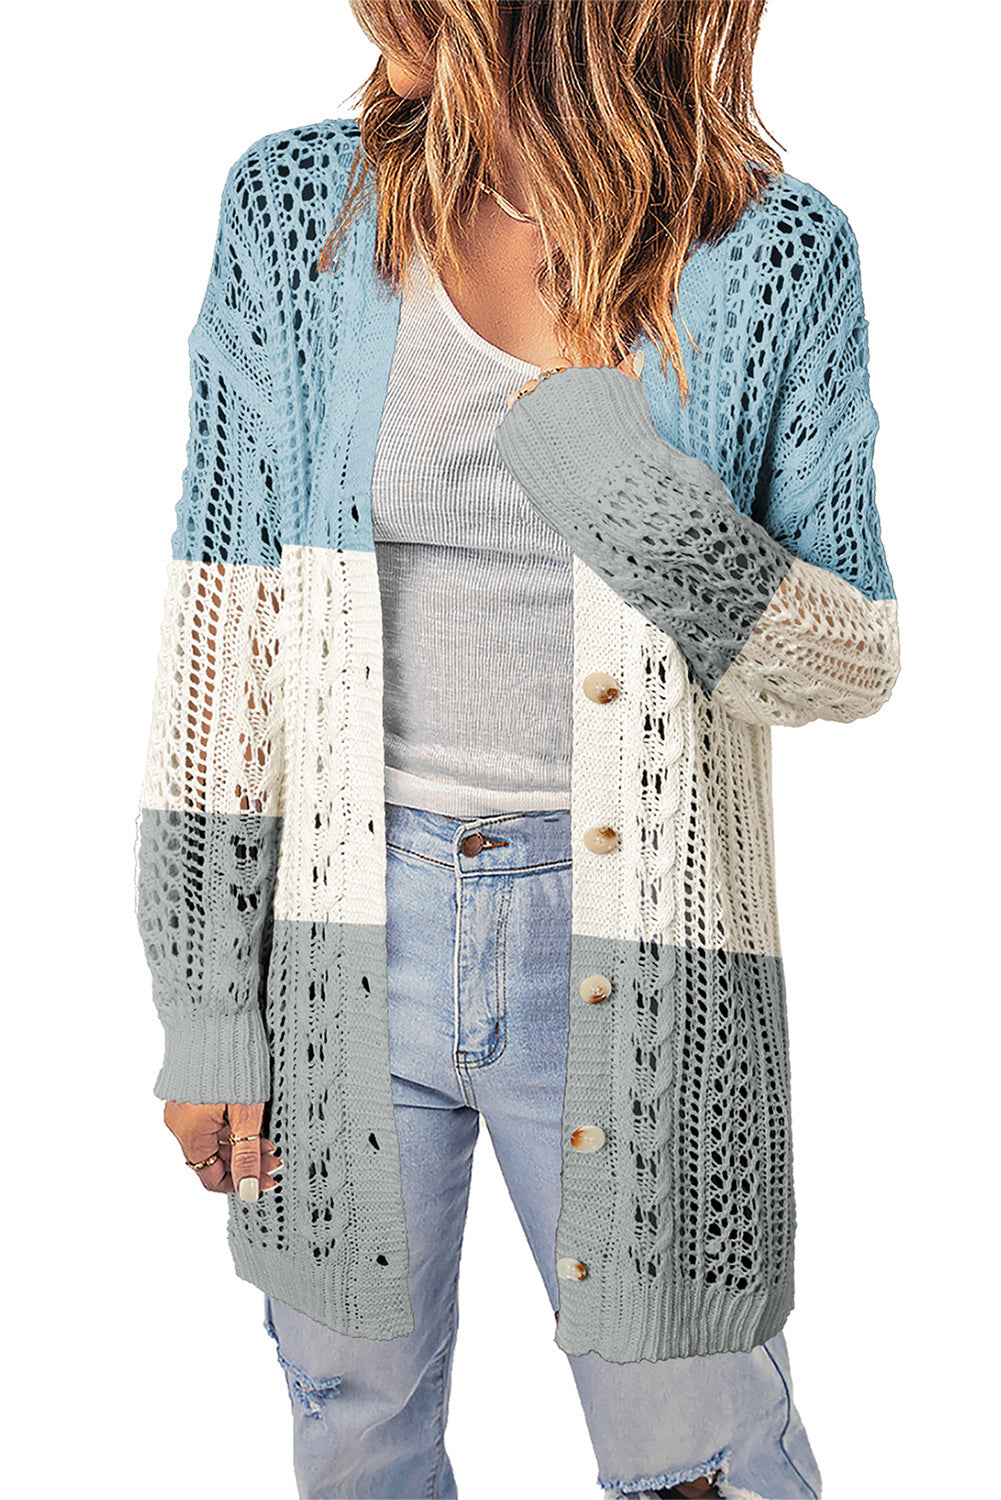 Openwork Ribbed Cuff Longline Cardigan - Blue / S - Women’s Clothing & Accessories - Shirts & Tops - 15 - 2024